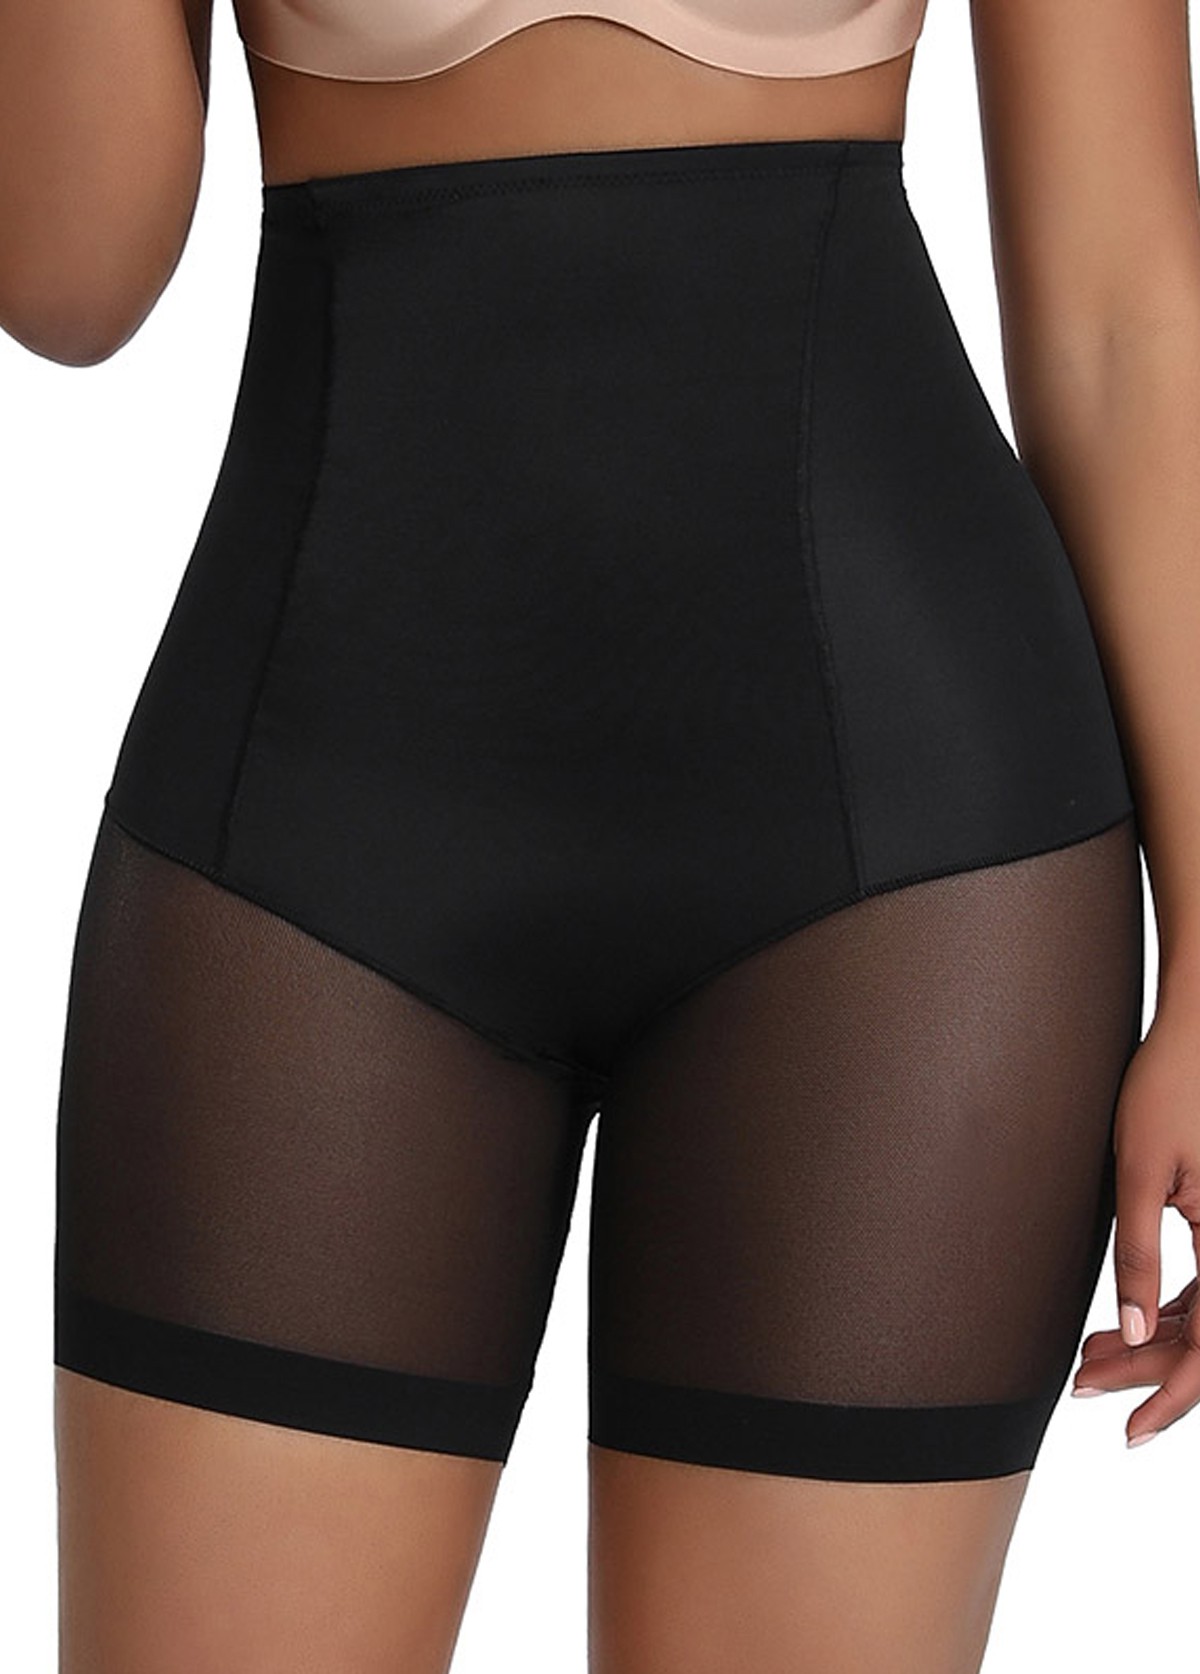 Black Solid High Waisted Panties